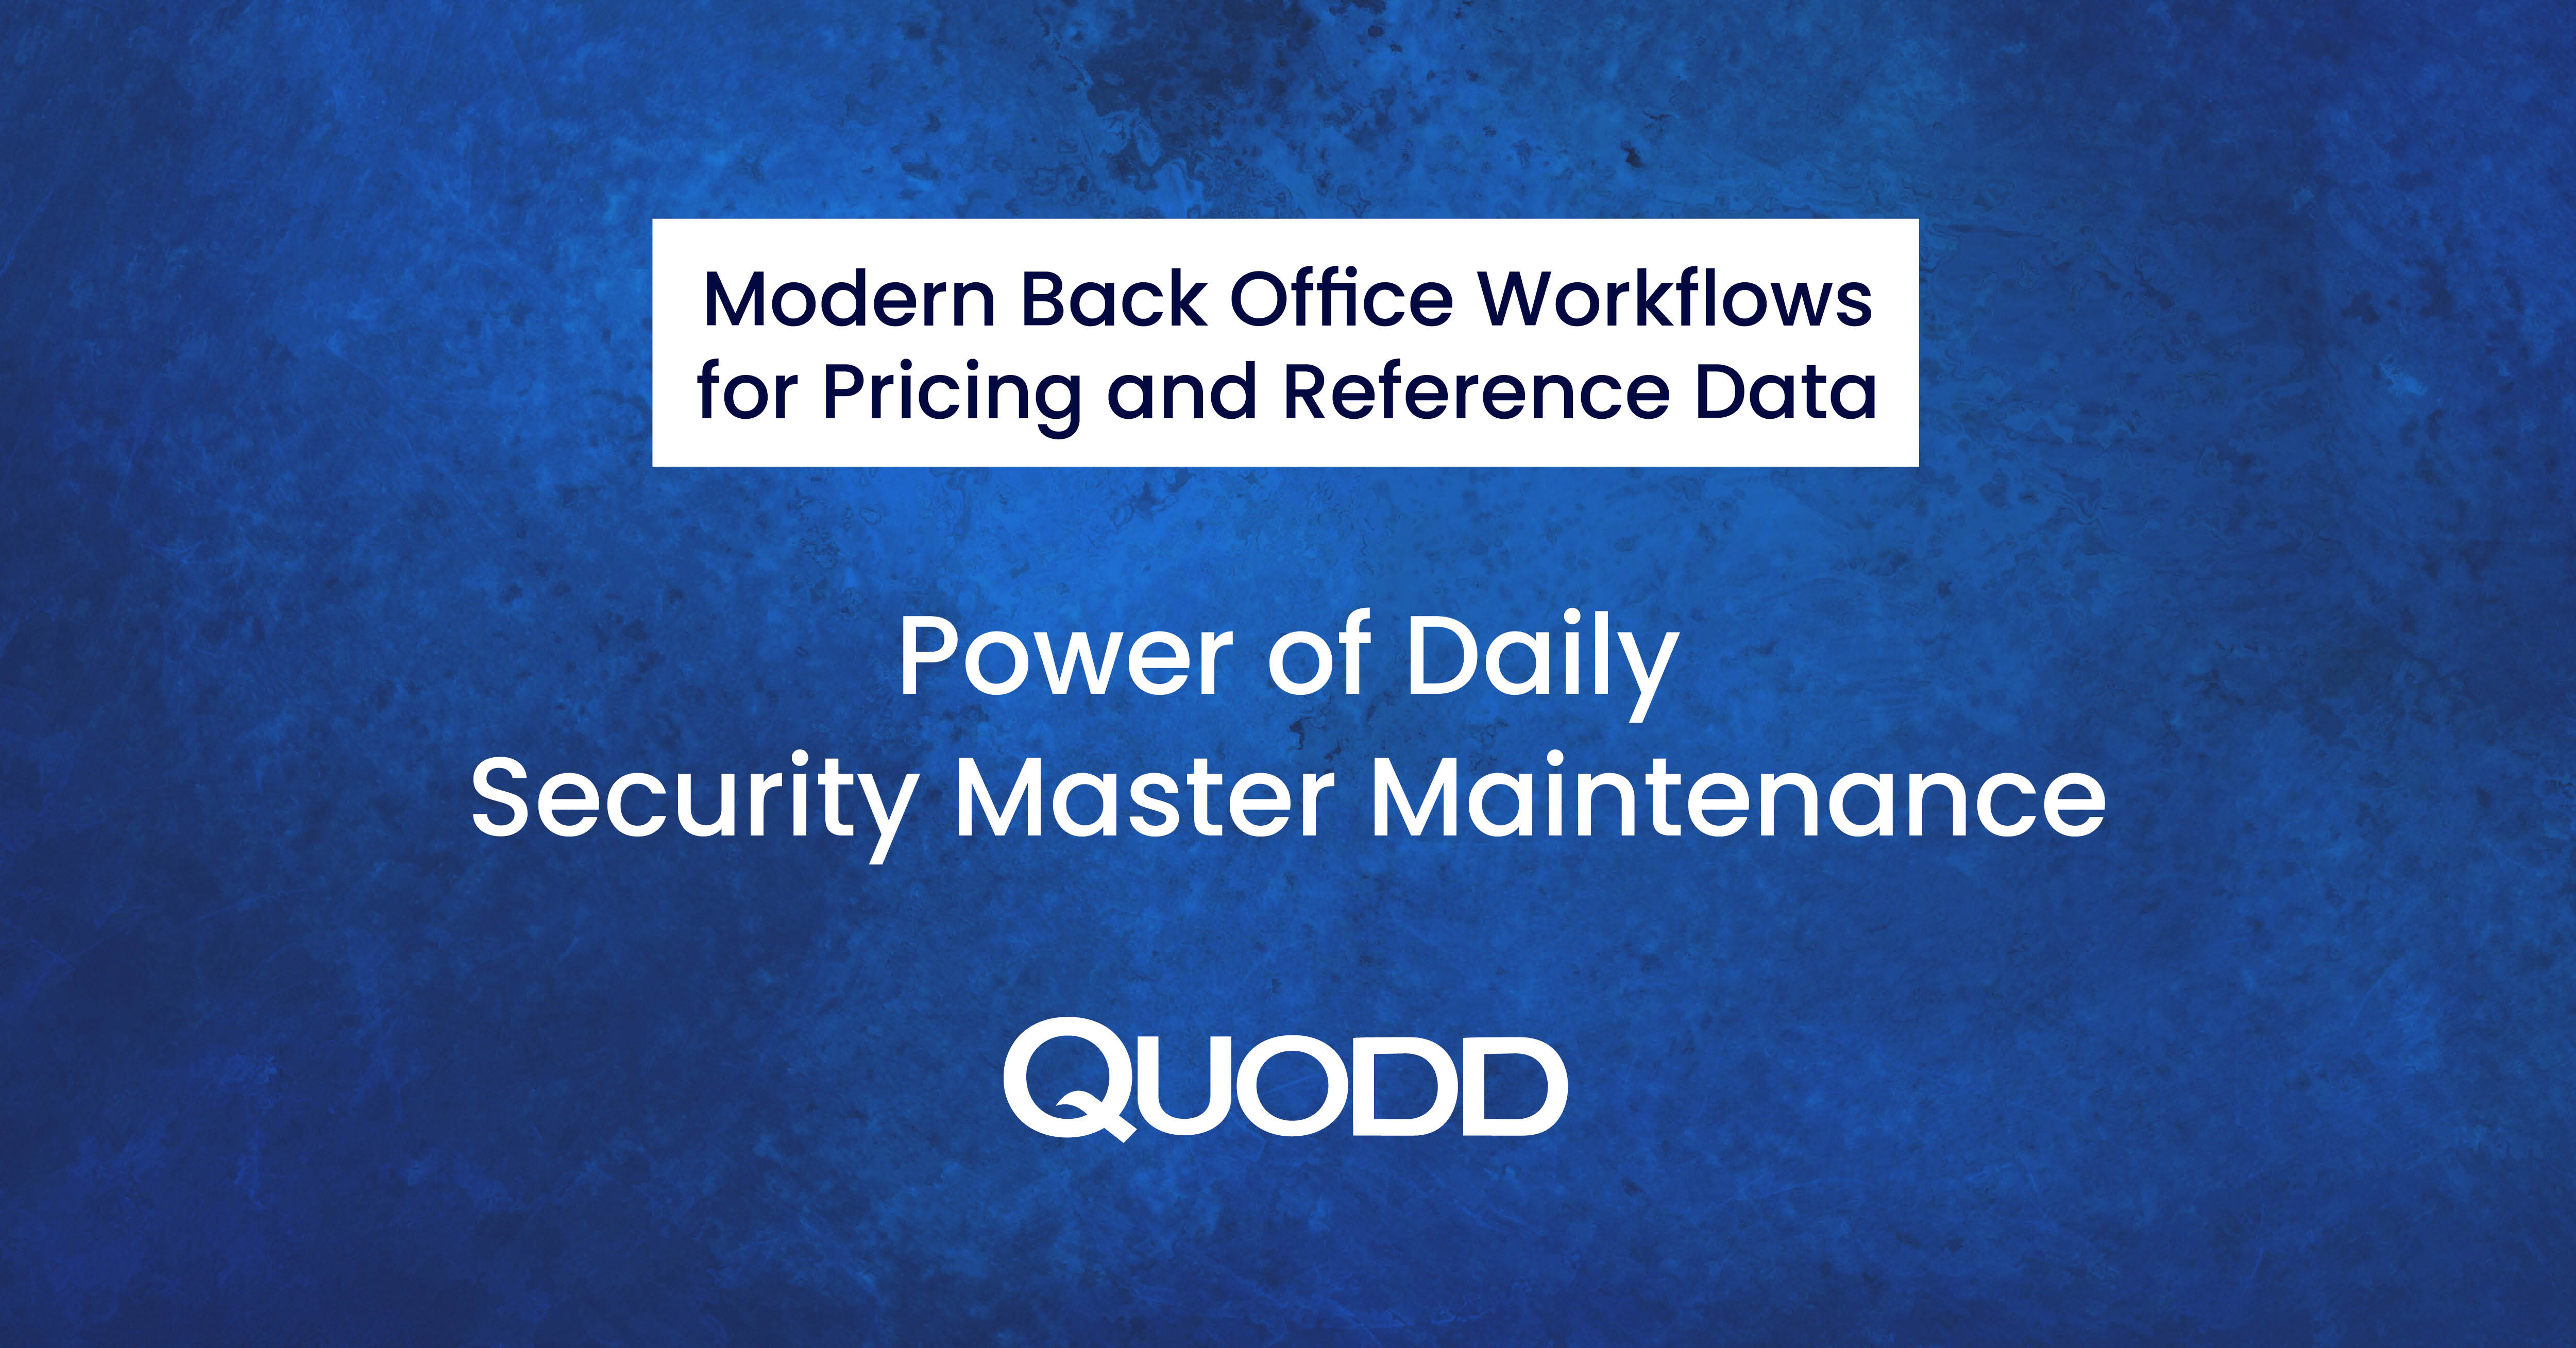 Modern Back Office Workflows for Pricing and Reference Data: The Power of Daily Security Master Maintenance